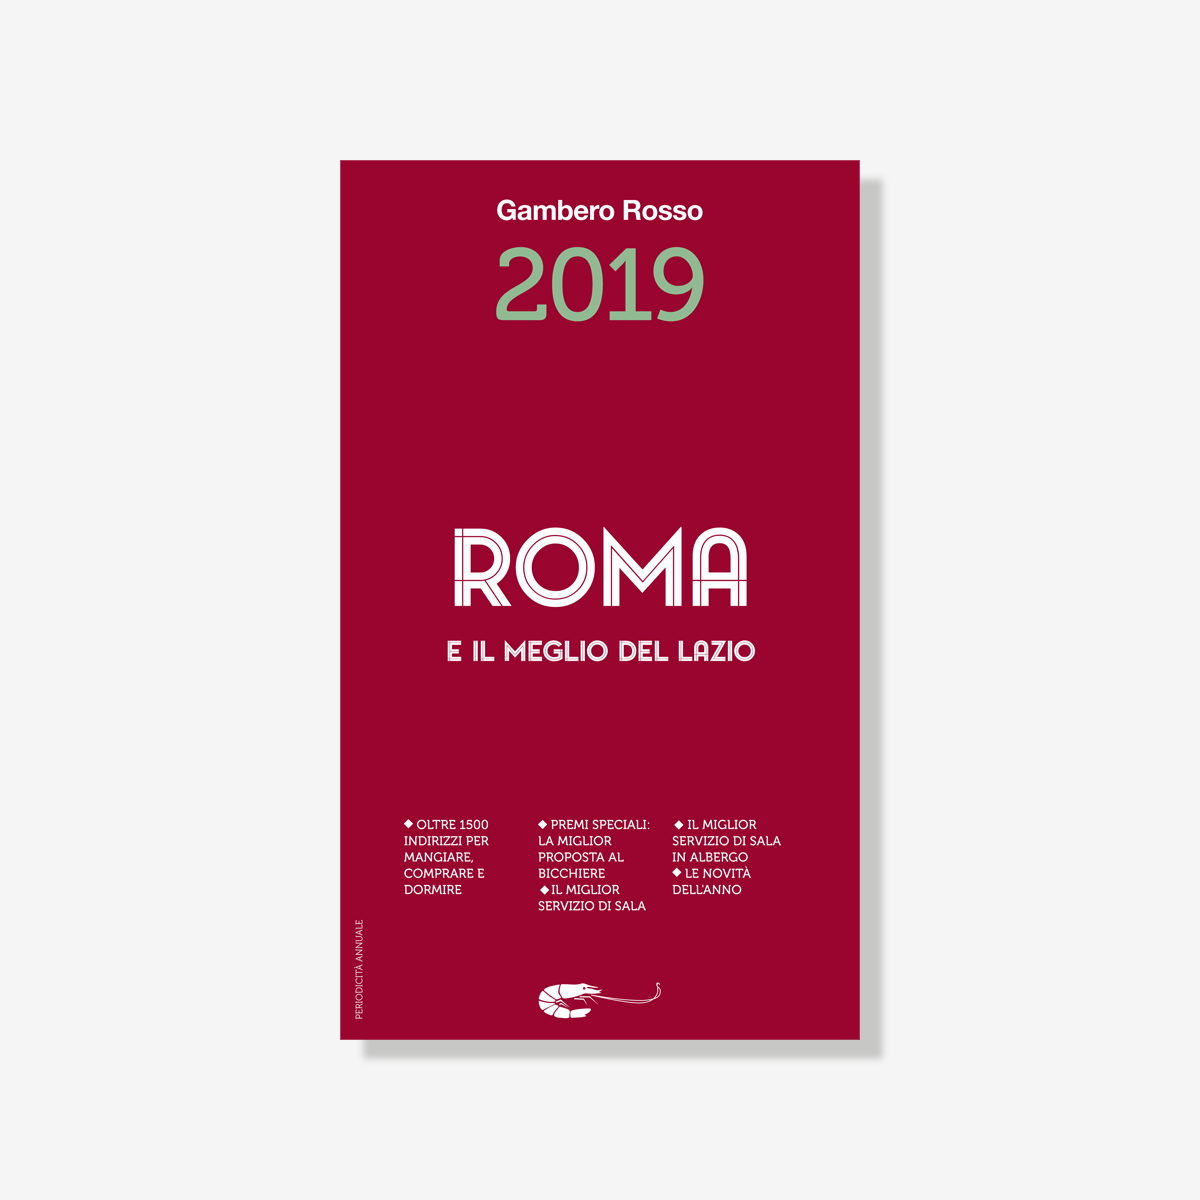 Poster of Guida Gambero Rosso 2019 at Rome Luxury Suites